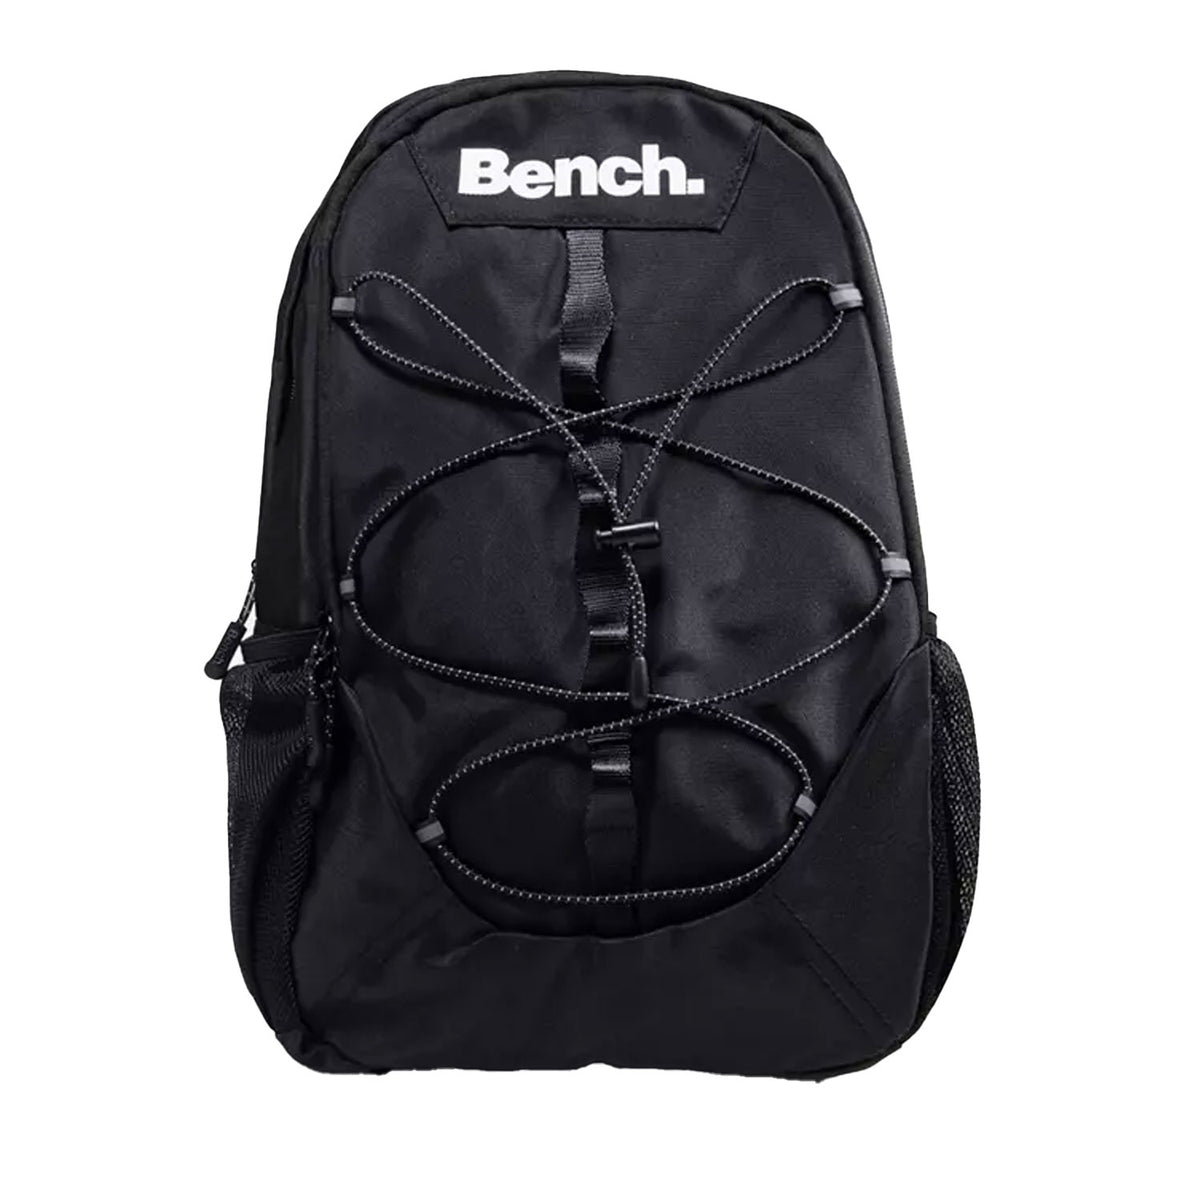 Bench Unisex Eclipse Backpack - Black - One Size